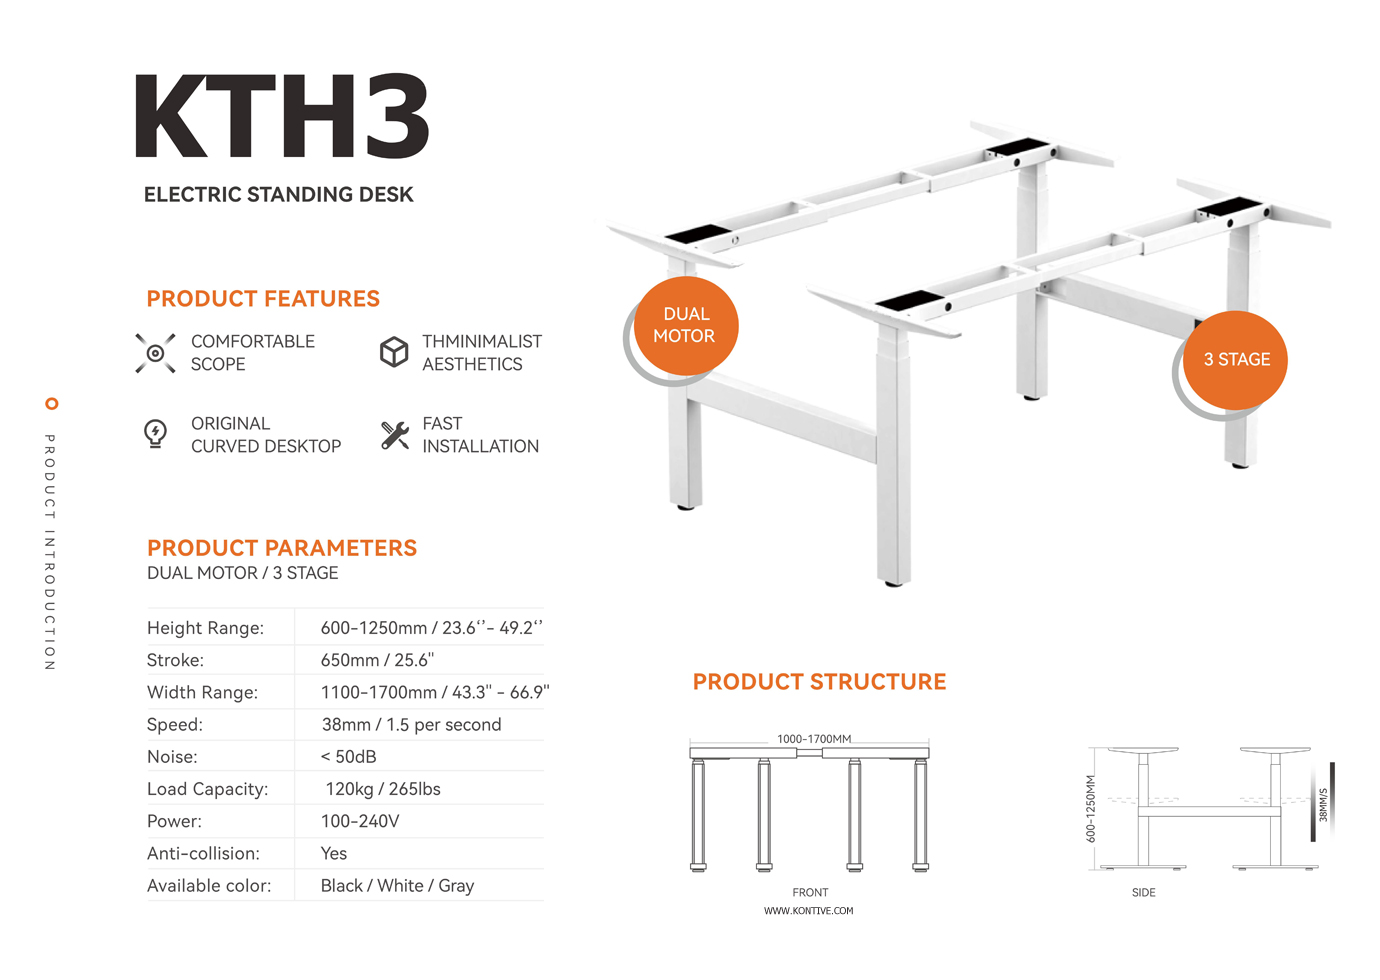 Four Motor 3 Stage Electric Standing Desk / 4 Legs Frame Specification